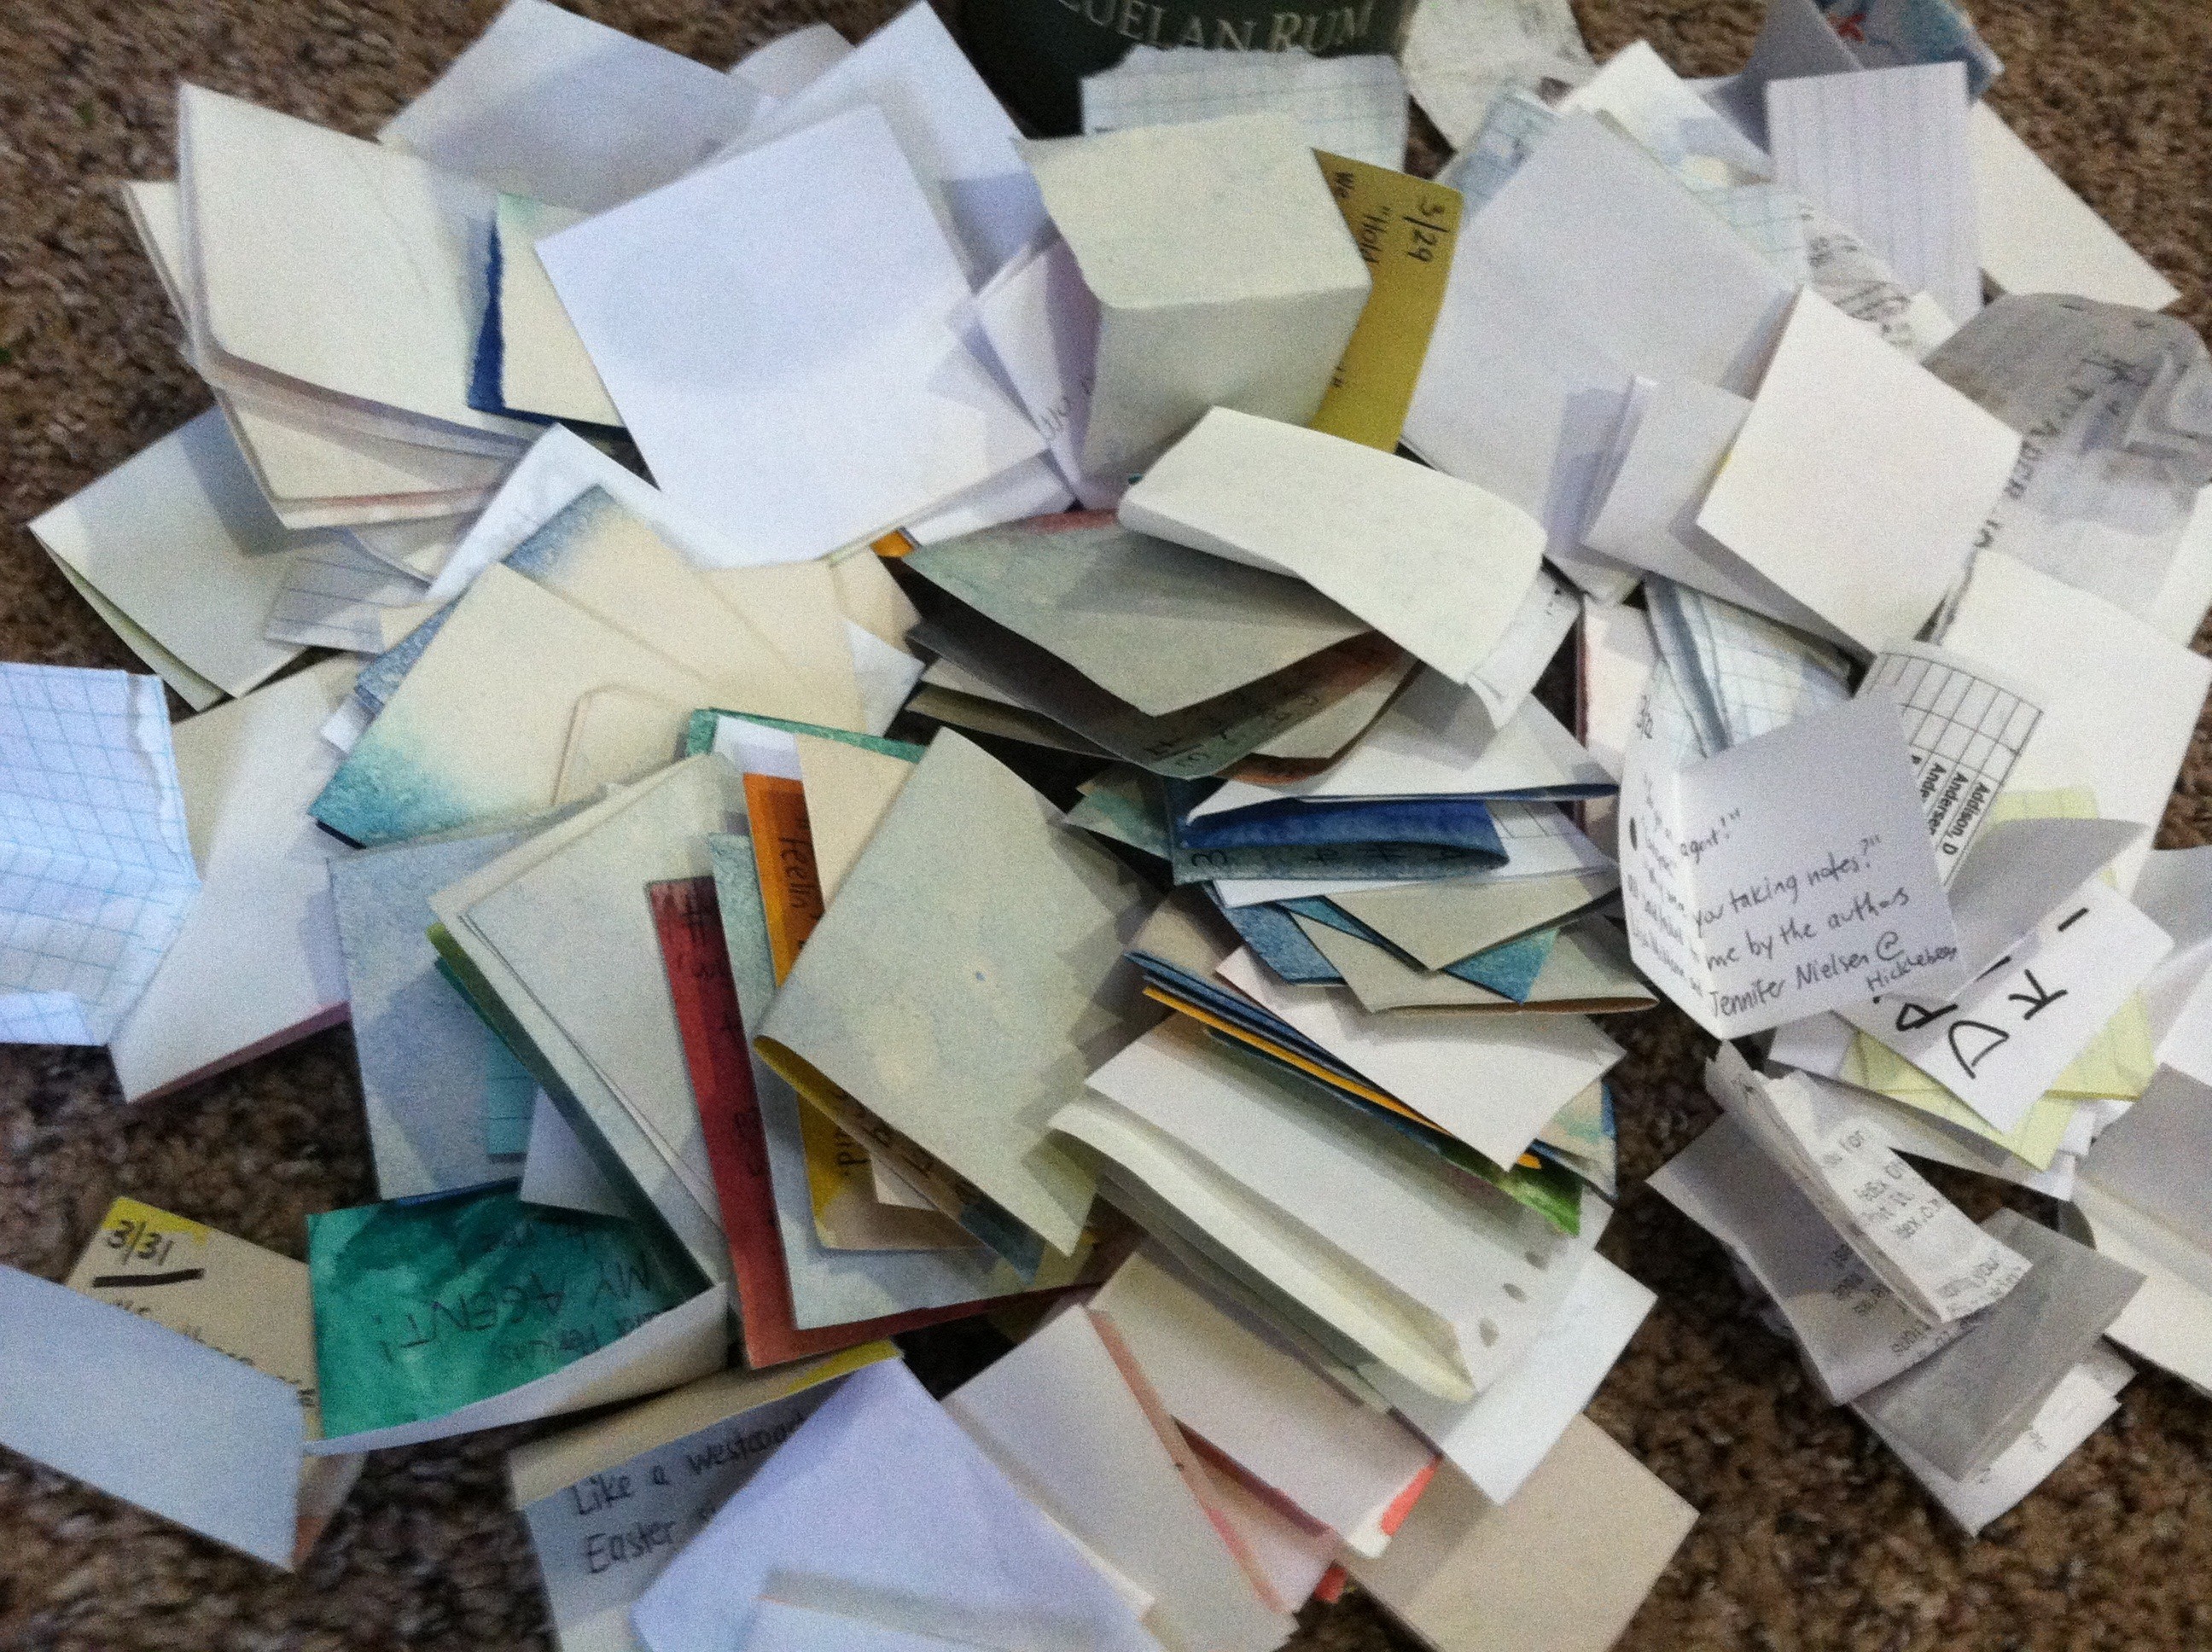 Here's all the little stories I've written (yes, look closely, I use hold slips sometimes!)